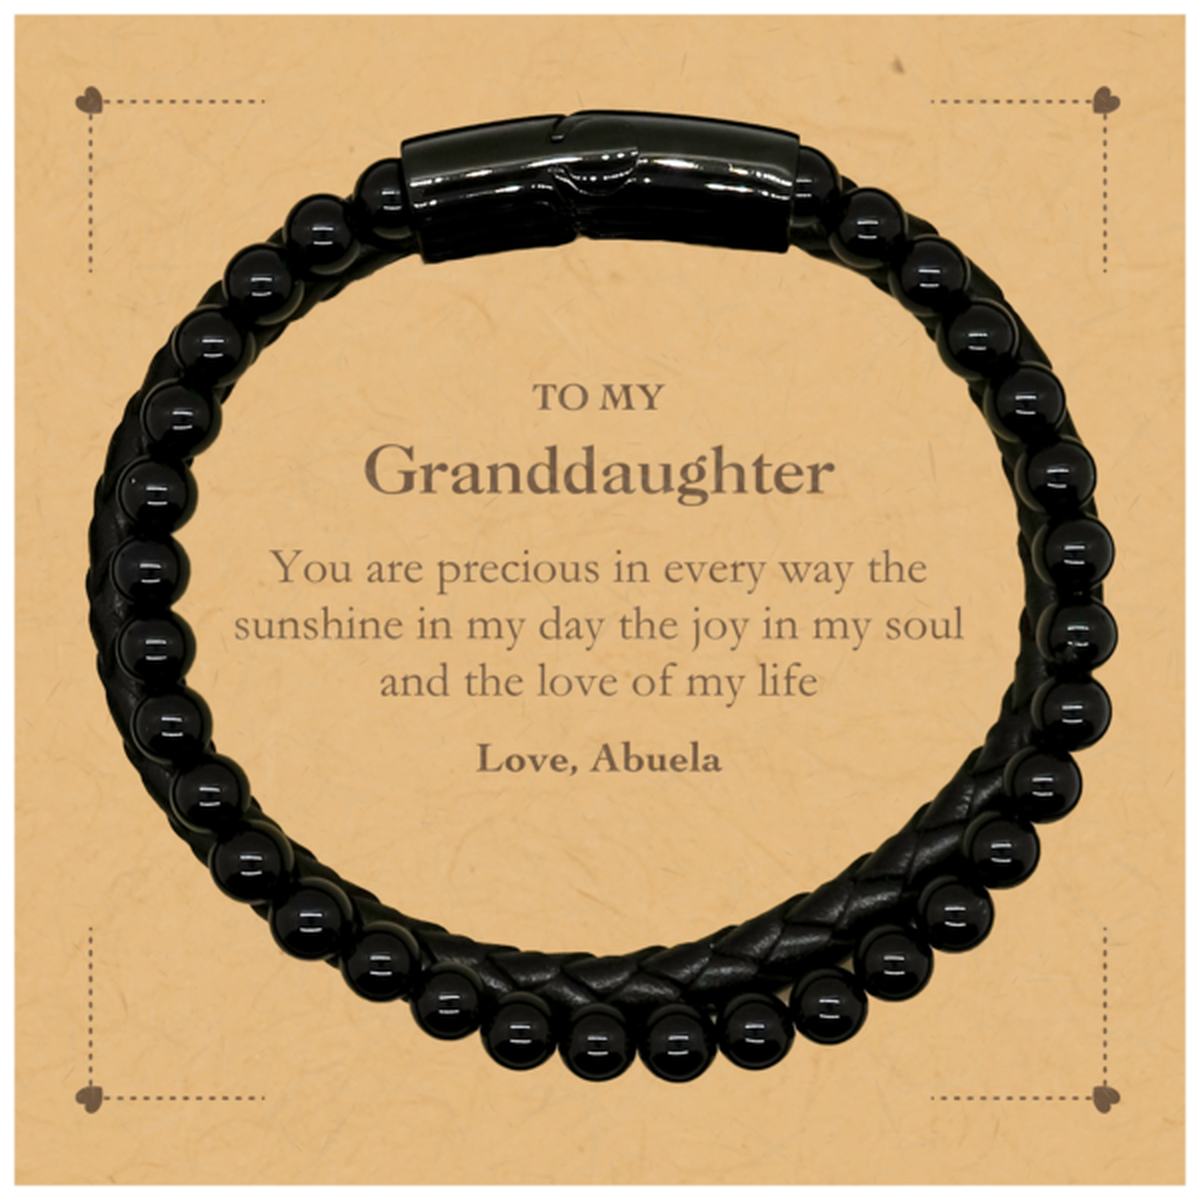 Graduation Gifts for Granddaughter Stone Leather Bracelets Present from Abuela, Christmas Granddaughter Birthday Gifts Granddaughter You are precious in every way the sunshine in my day. Love, Abuela